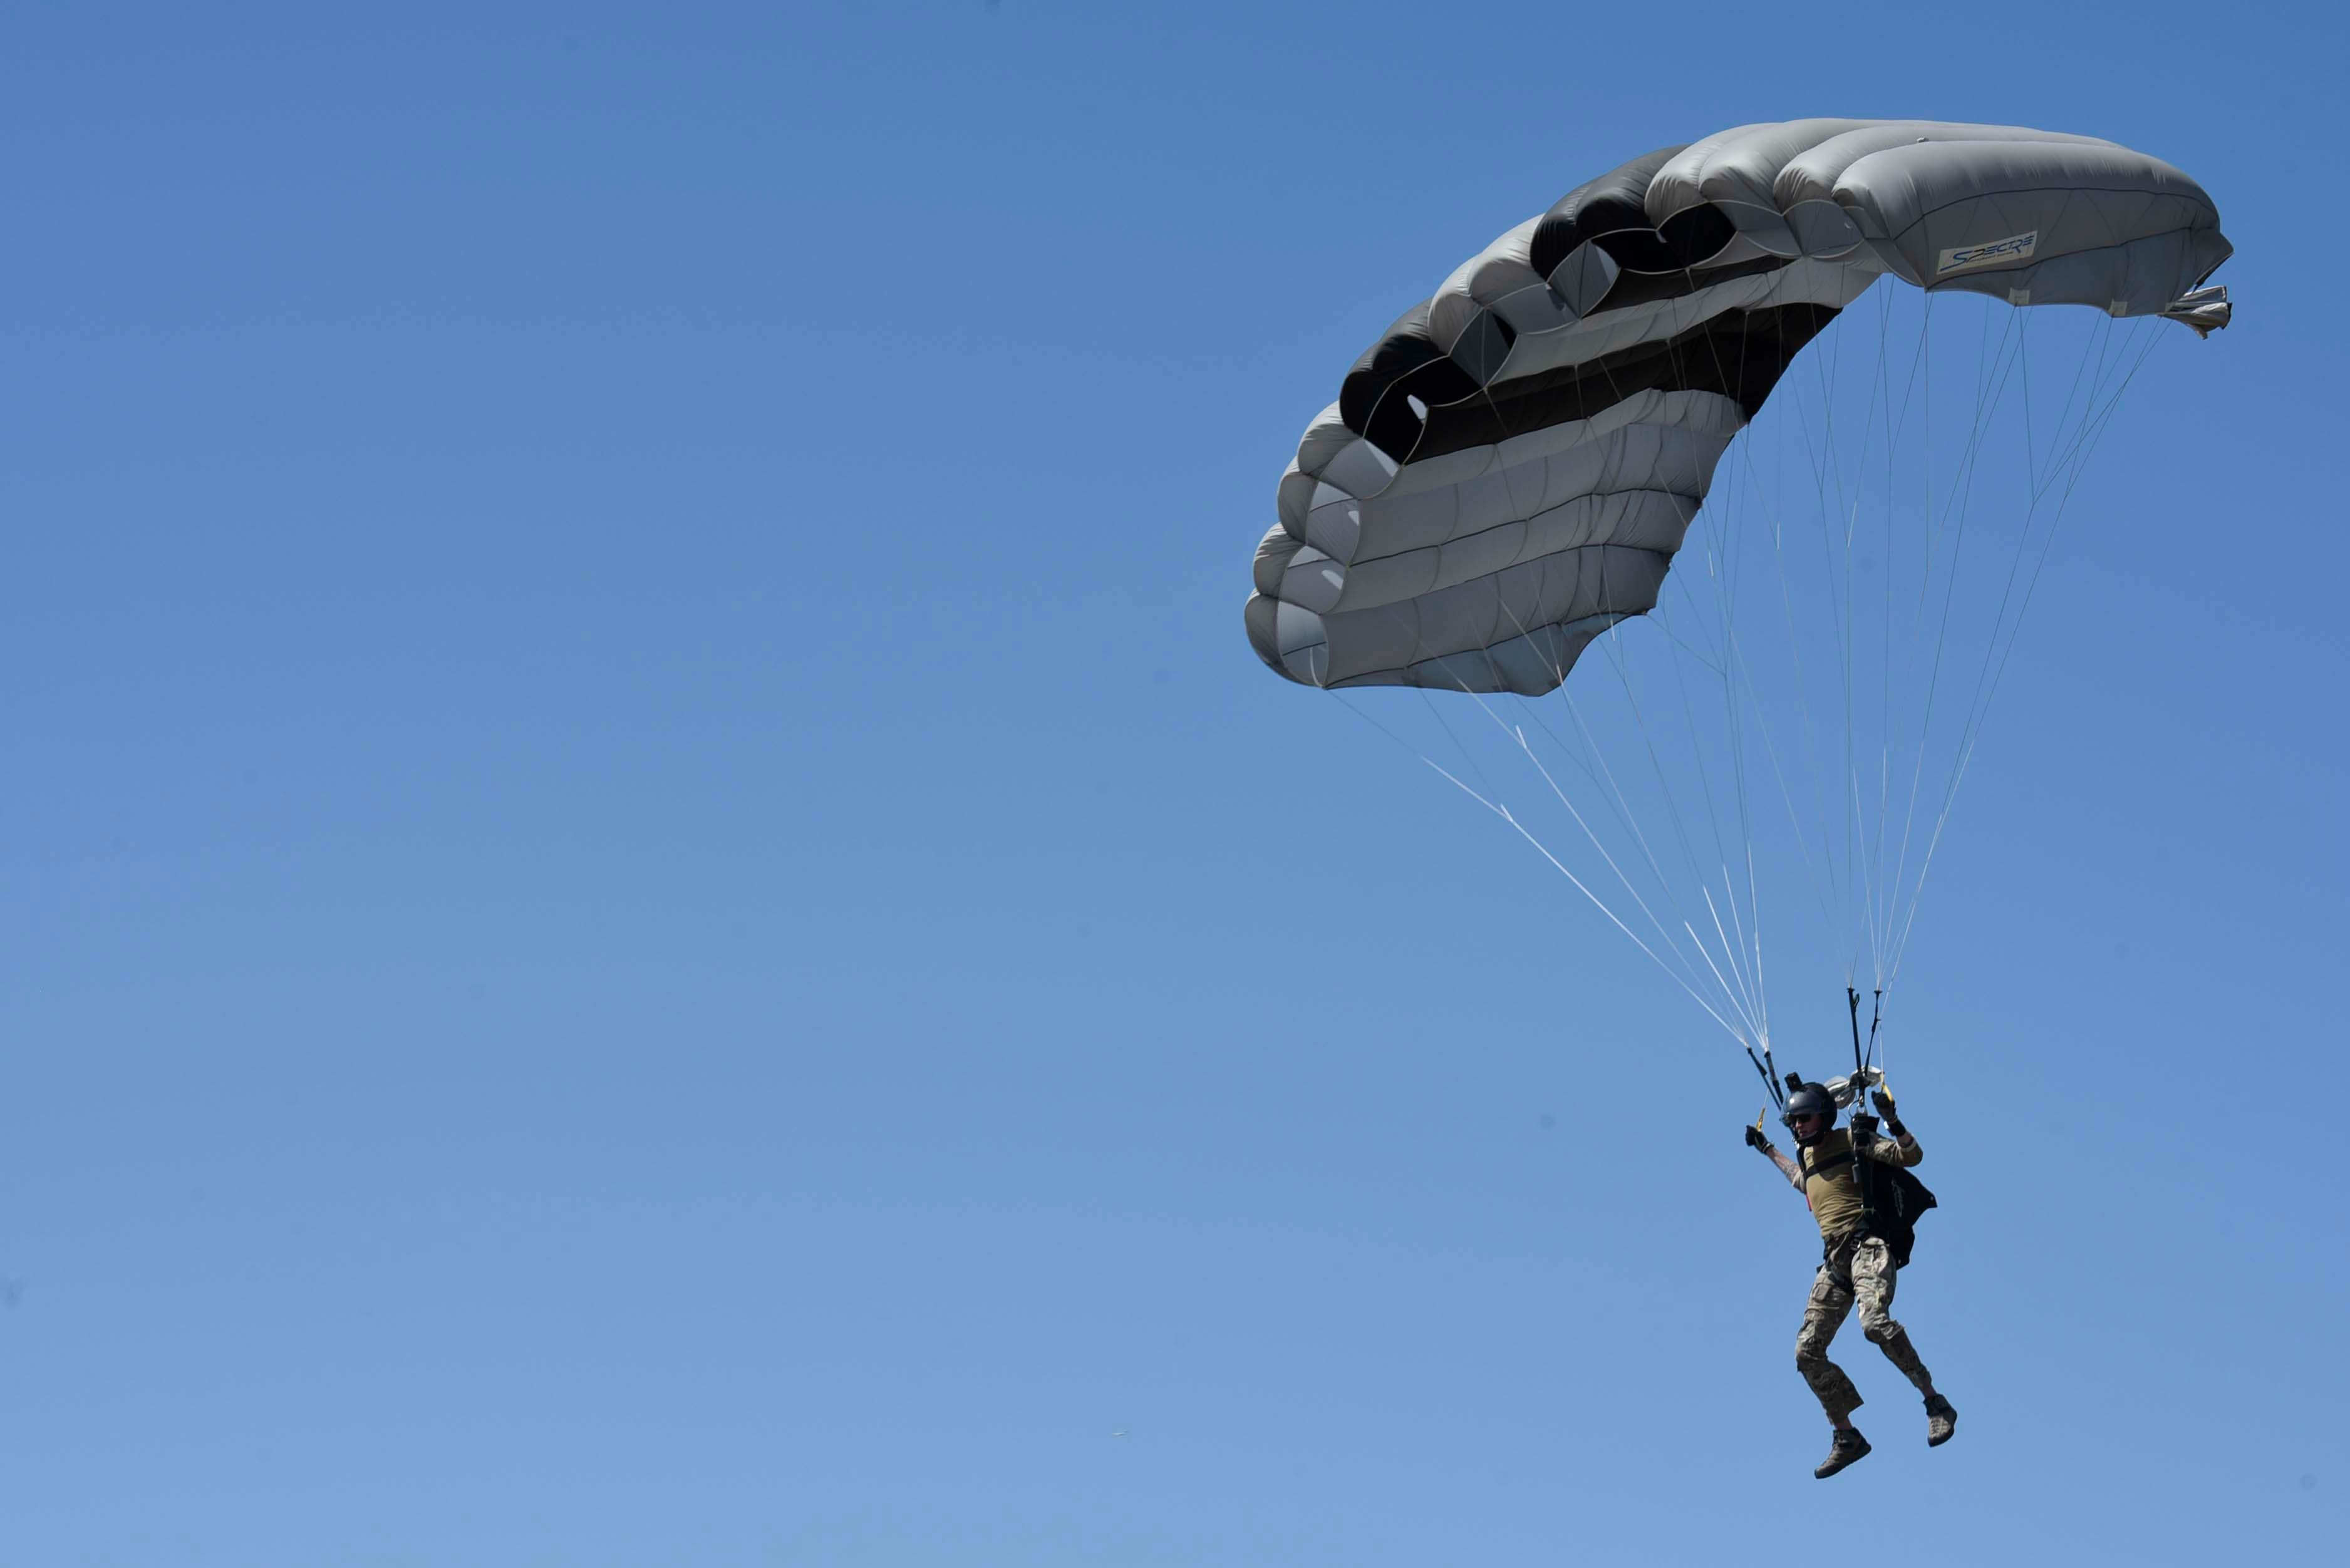 A Survival, Evasion, Resistance and Escape (SERE) Specialist, from the 22nd Training Squadron, safely parachutes to the flightline during training at Fairchild Air Force Base, Washington May 31, 2023. Parachuting is an integral part of SERE training that ensures the readiness of the Airmen who go through the course. (U.S. Air Force photo by Airman 1st Class Clare Werner)